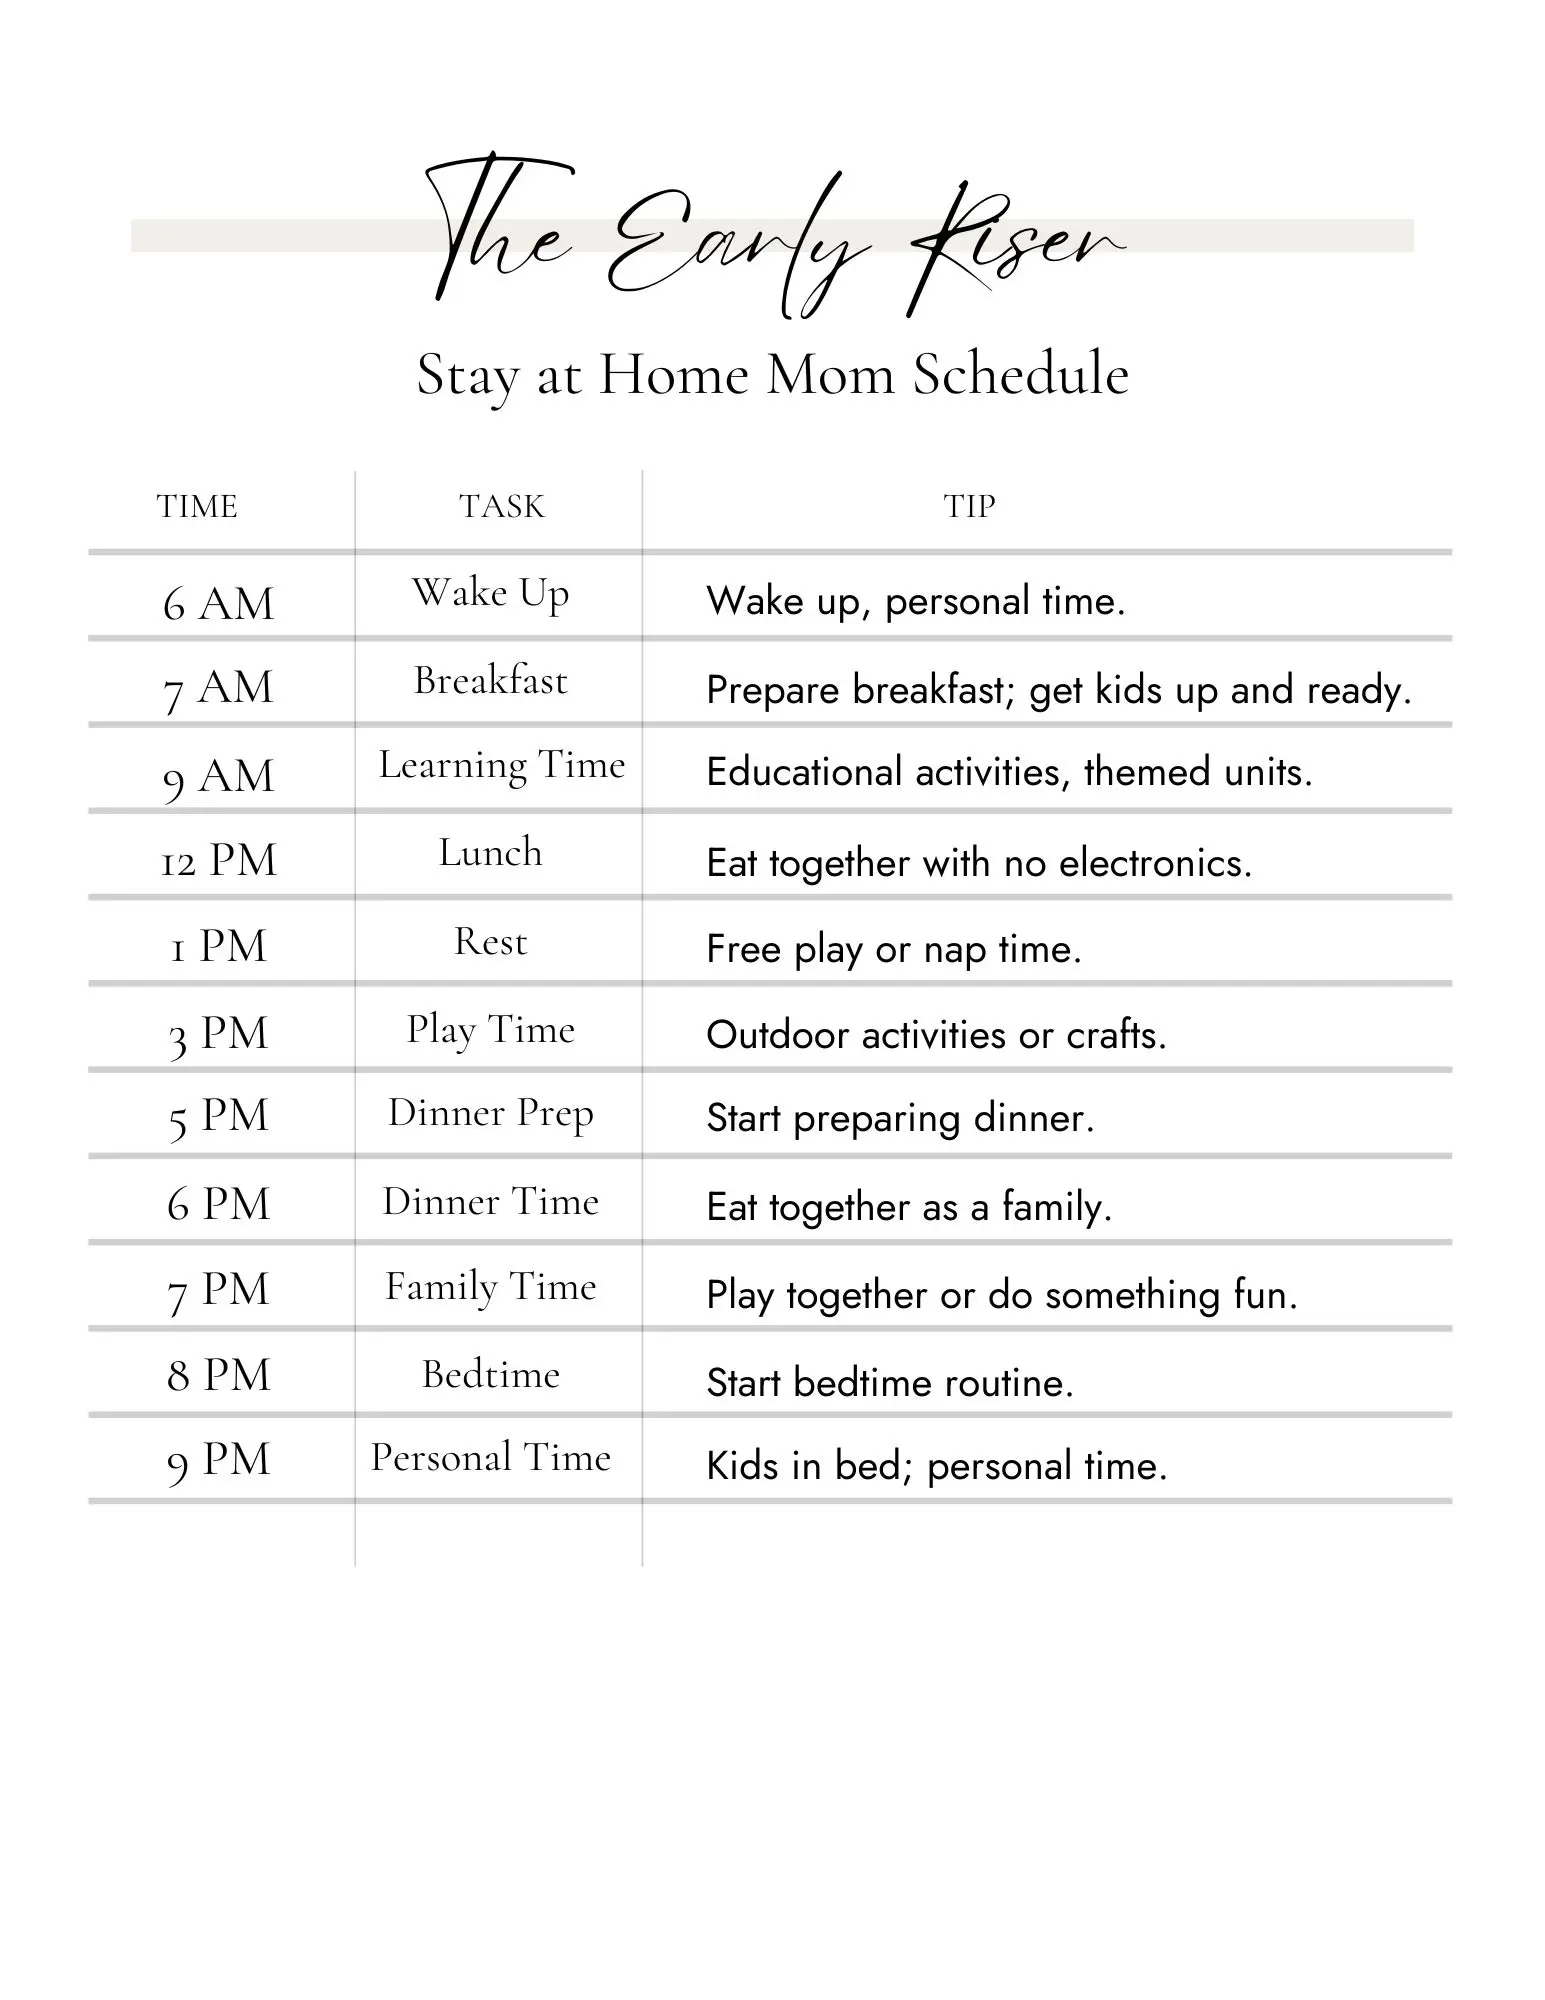 image of a stay at home mom schedule for an early riser